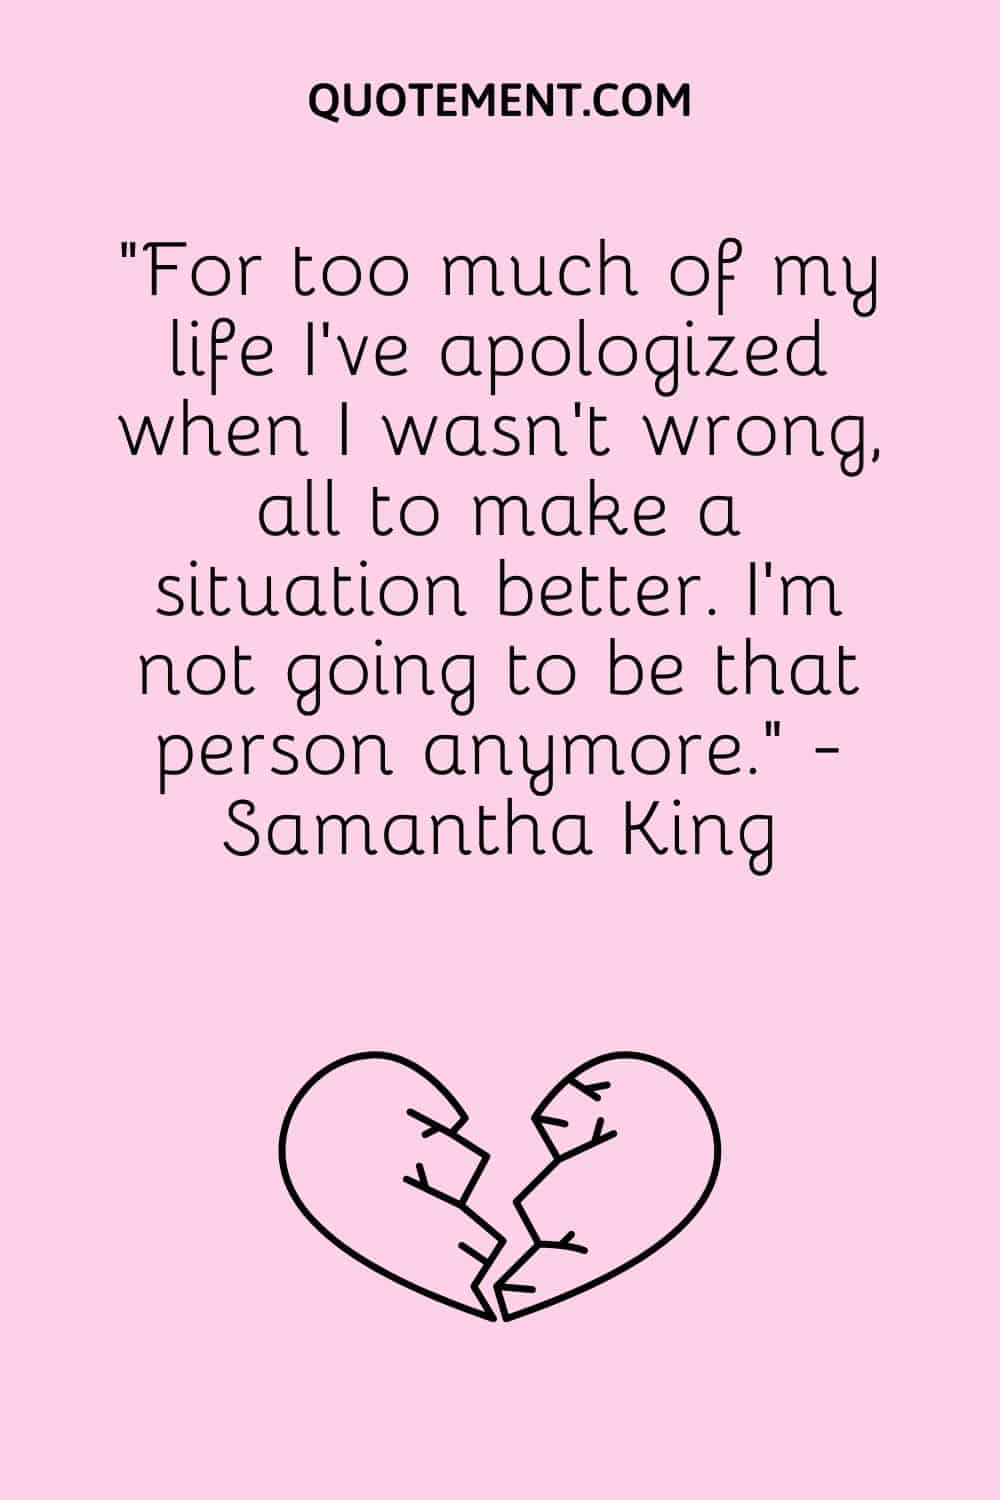 “For too much of my life I've apologized when I wasn't wrong, all to make a situation better. I'm not going to be that person anymore.” - Samantha King